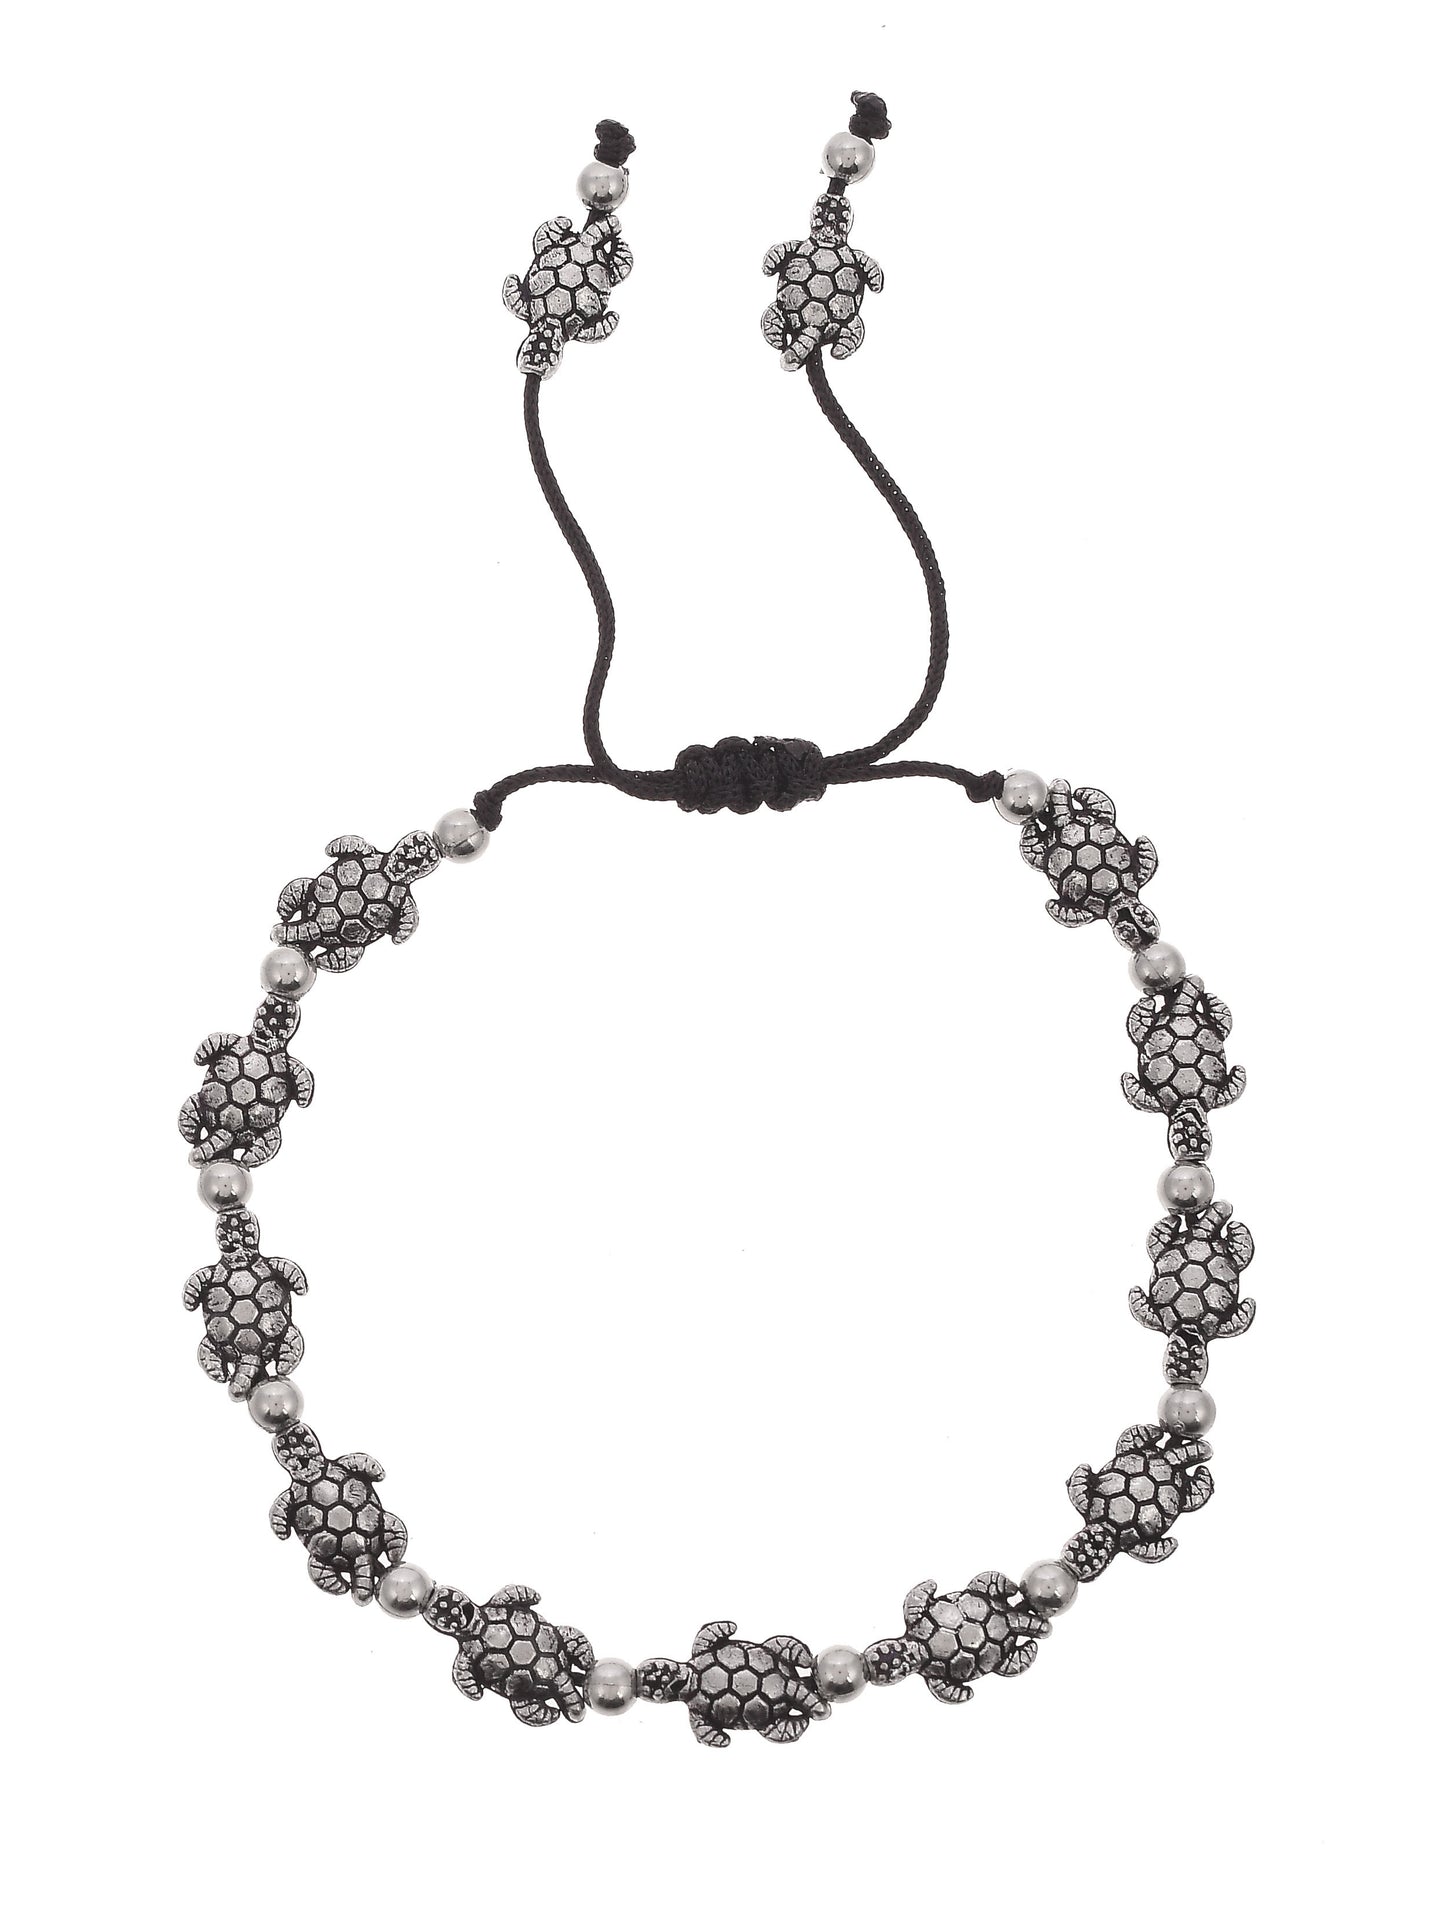 Silver Plated Oxidized Tortoise Bead Black Thread Anklets for Women